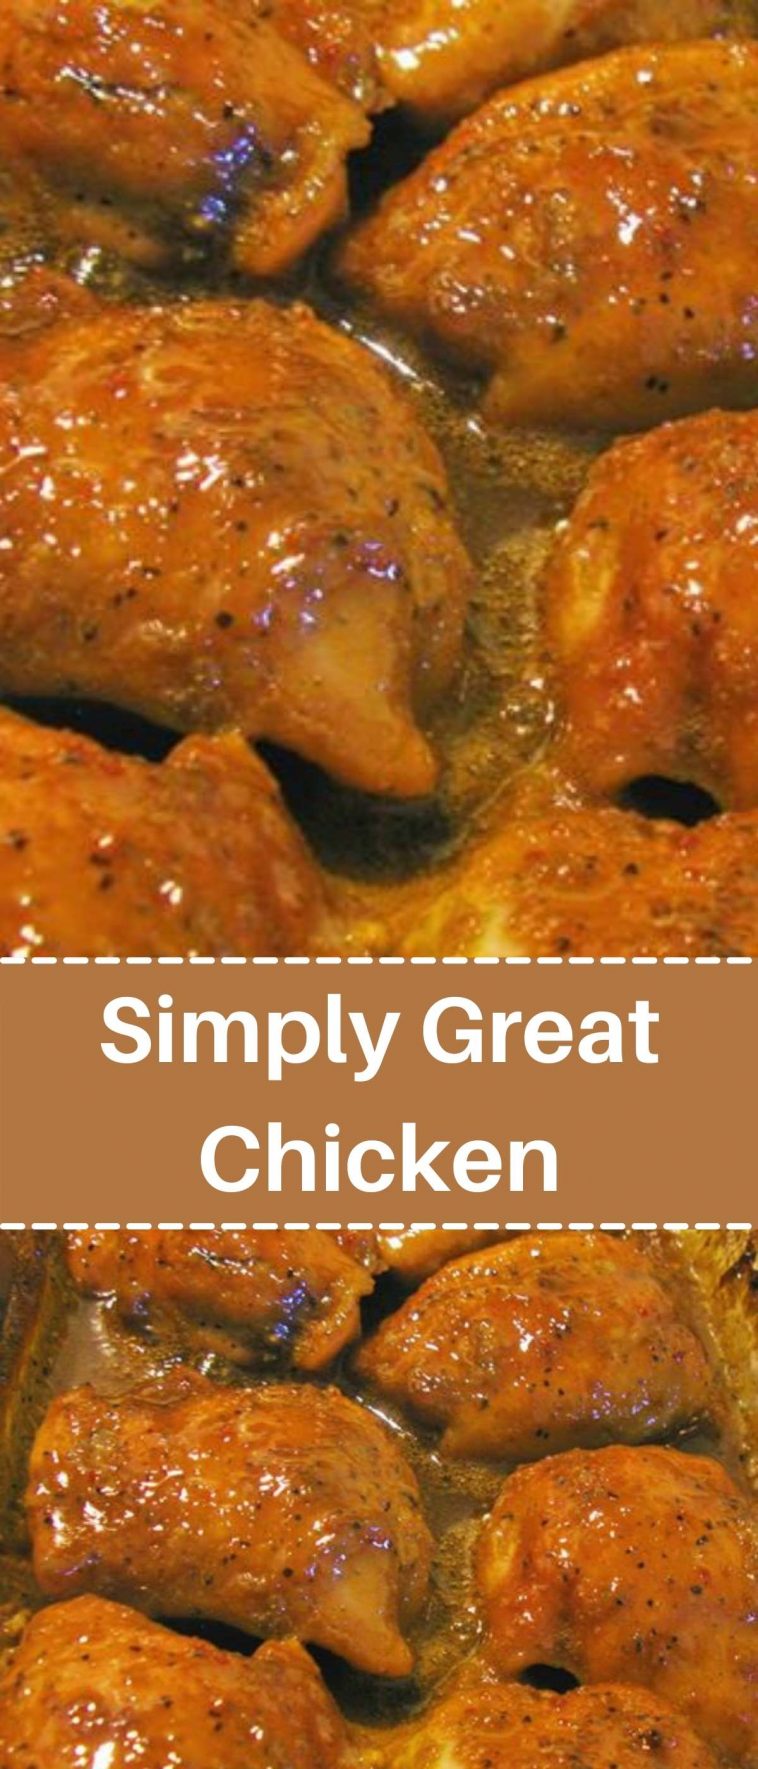 Simply Great Chicken – Try this one for dinner tonight!